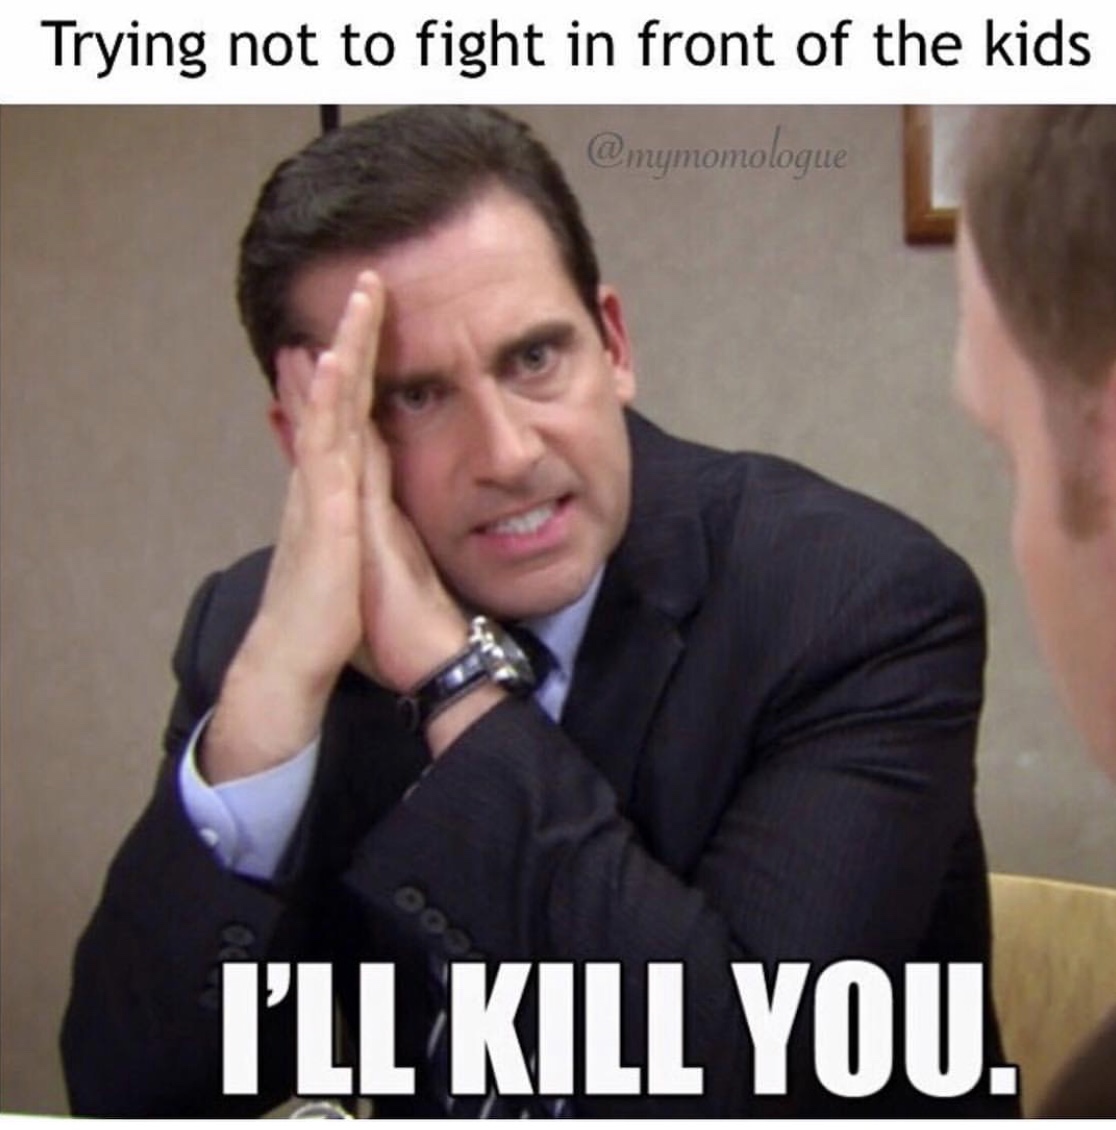 19 Parenting Memes That Will Light Up The Mood